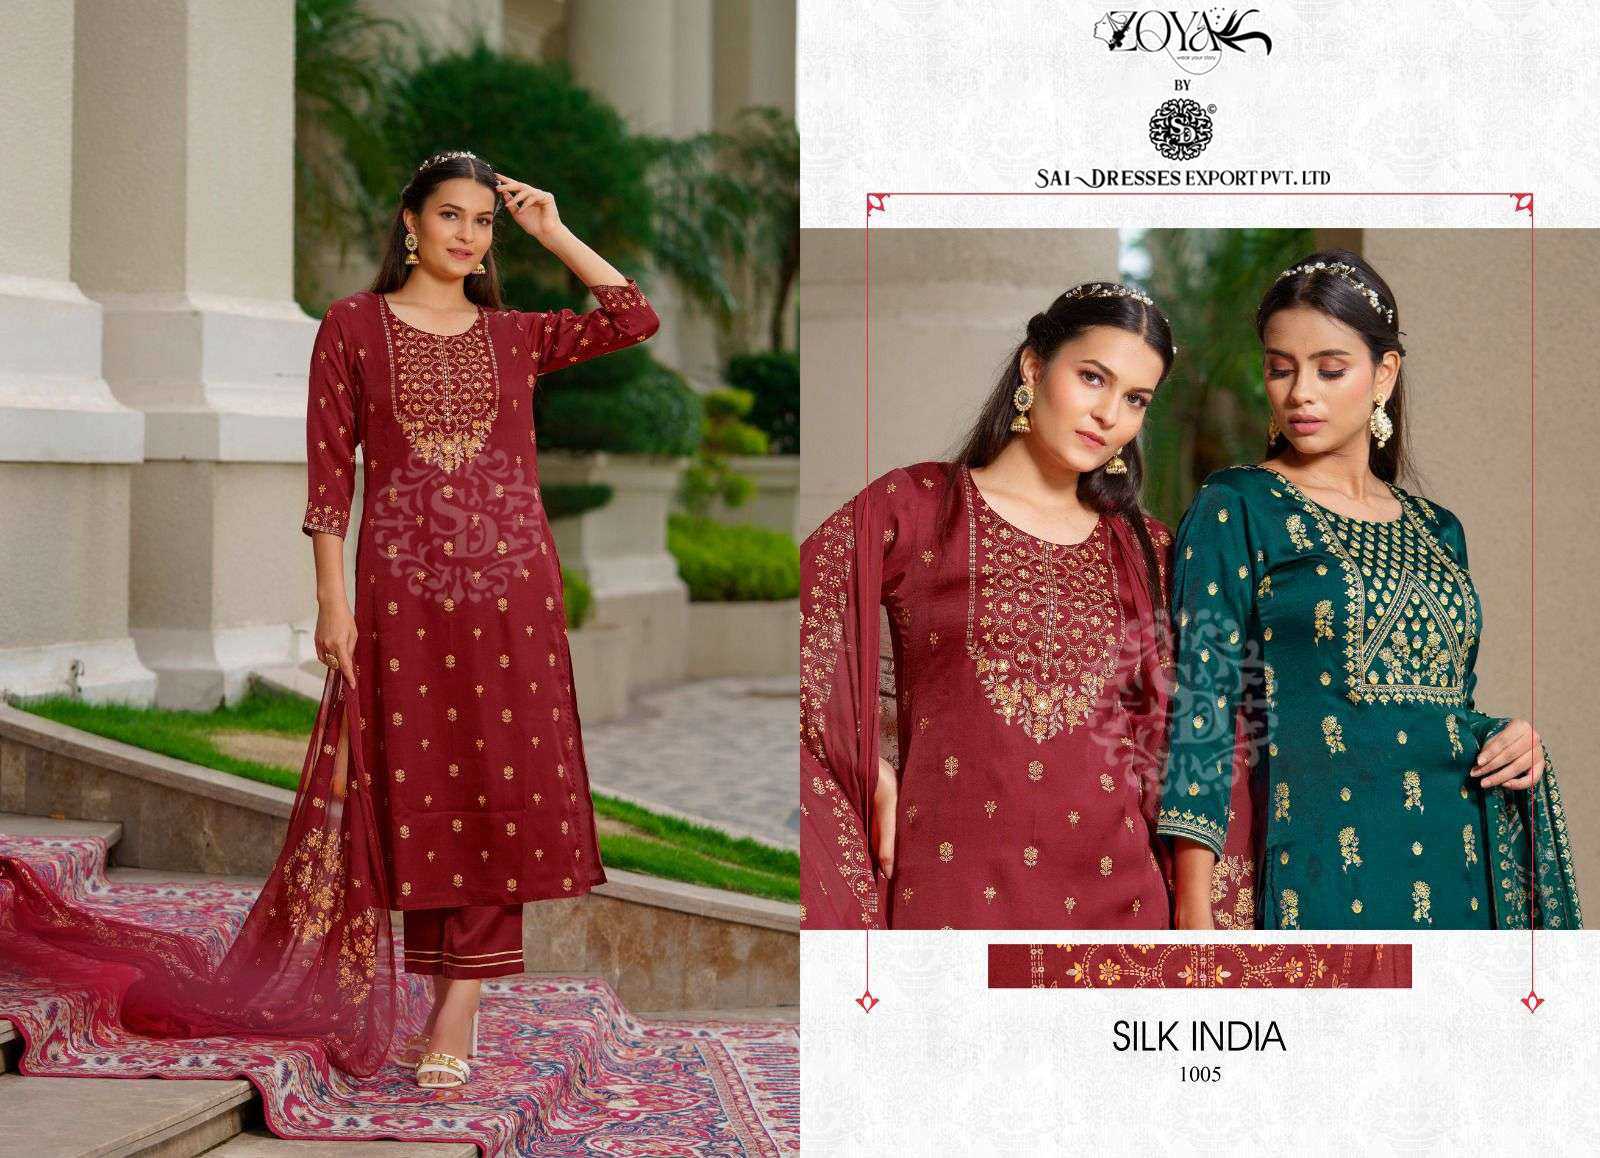 SAI DRESSES PRESENT SILK INDIA READY TO GOLD PRINTED SILK PARTY WEAR DESIGNER 3 PIECE SUITS IN WHOLESALE RATE IN SURAT